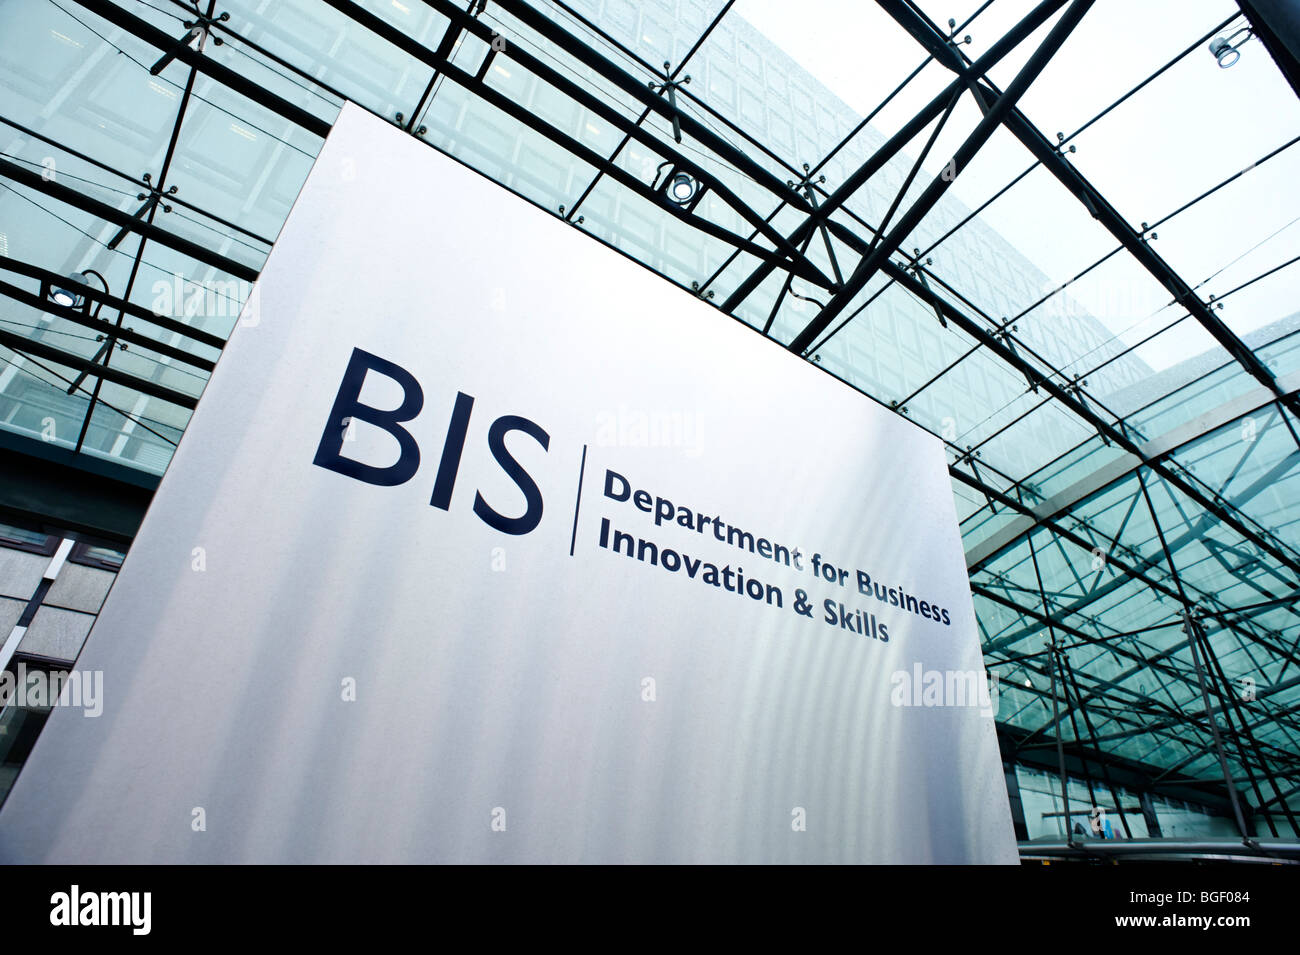 BIS. Department for Business Innovation & Skills. London. UK 2009. Stock Photo